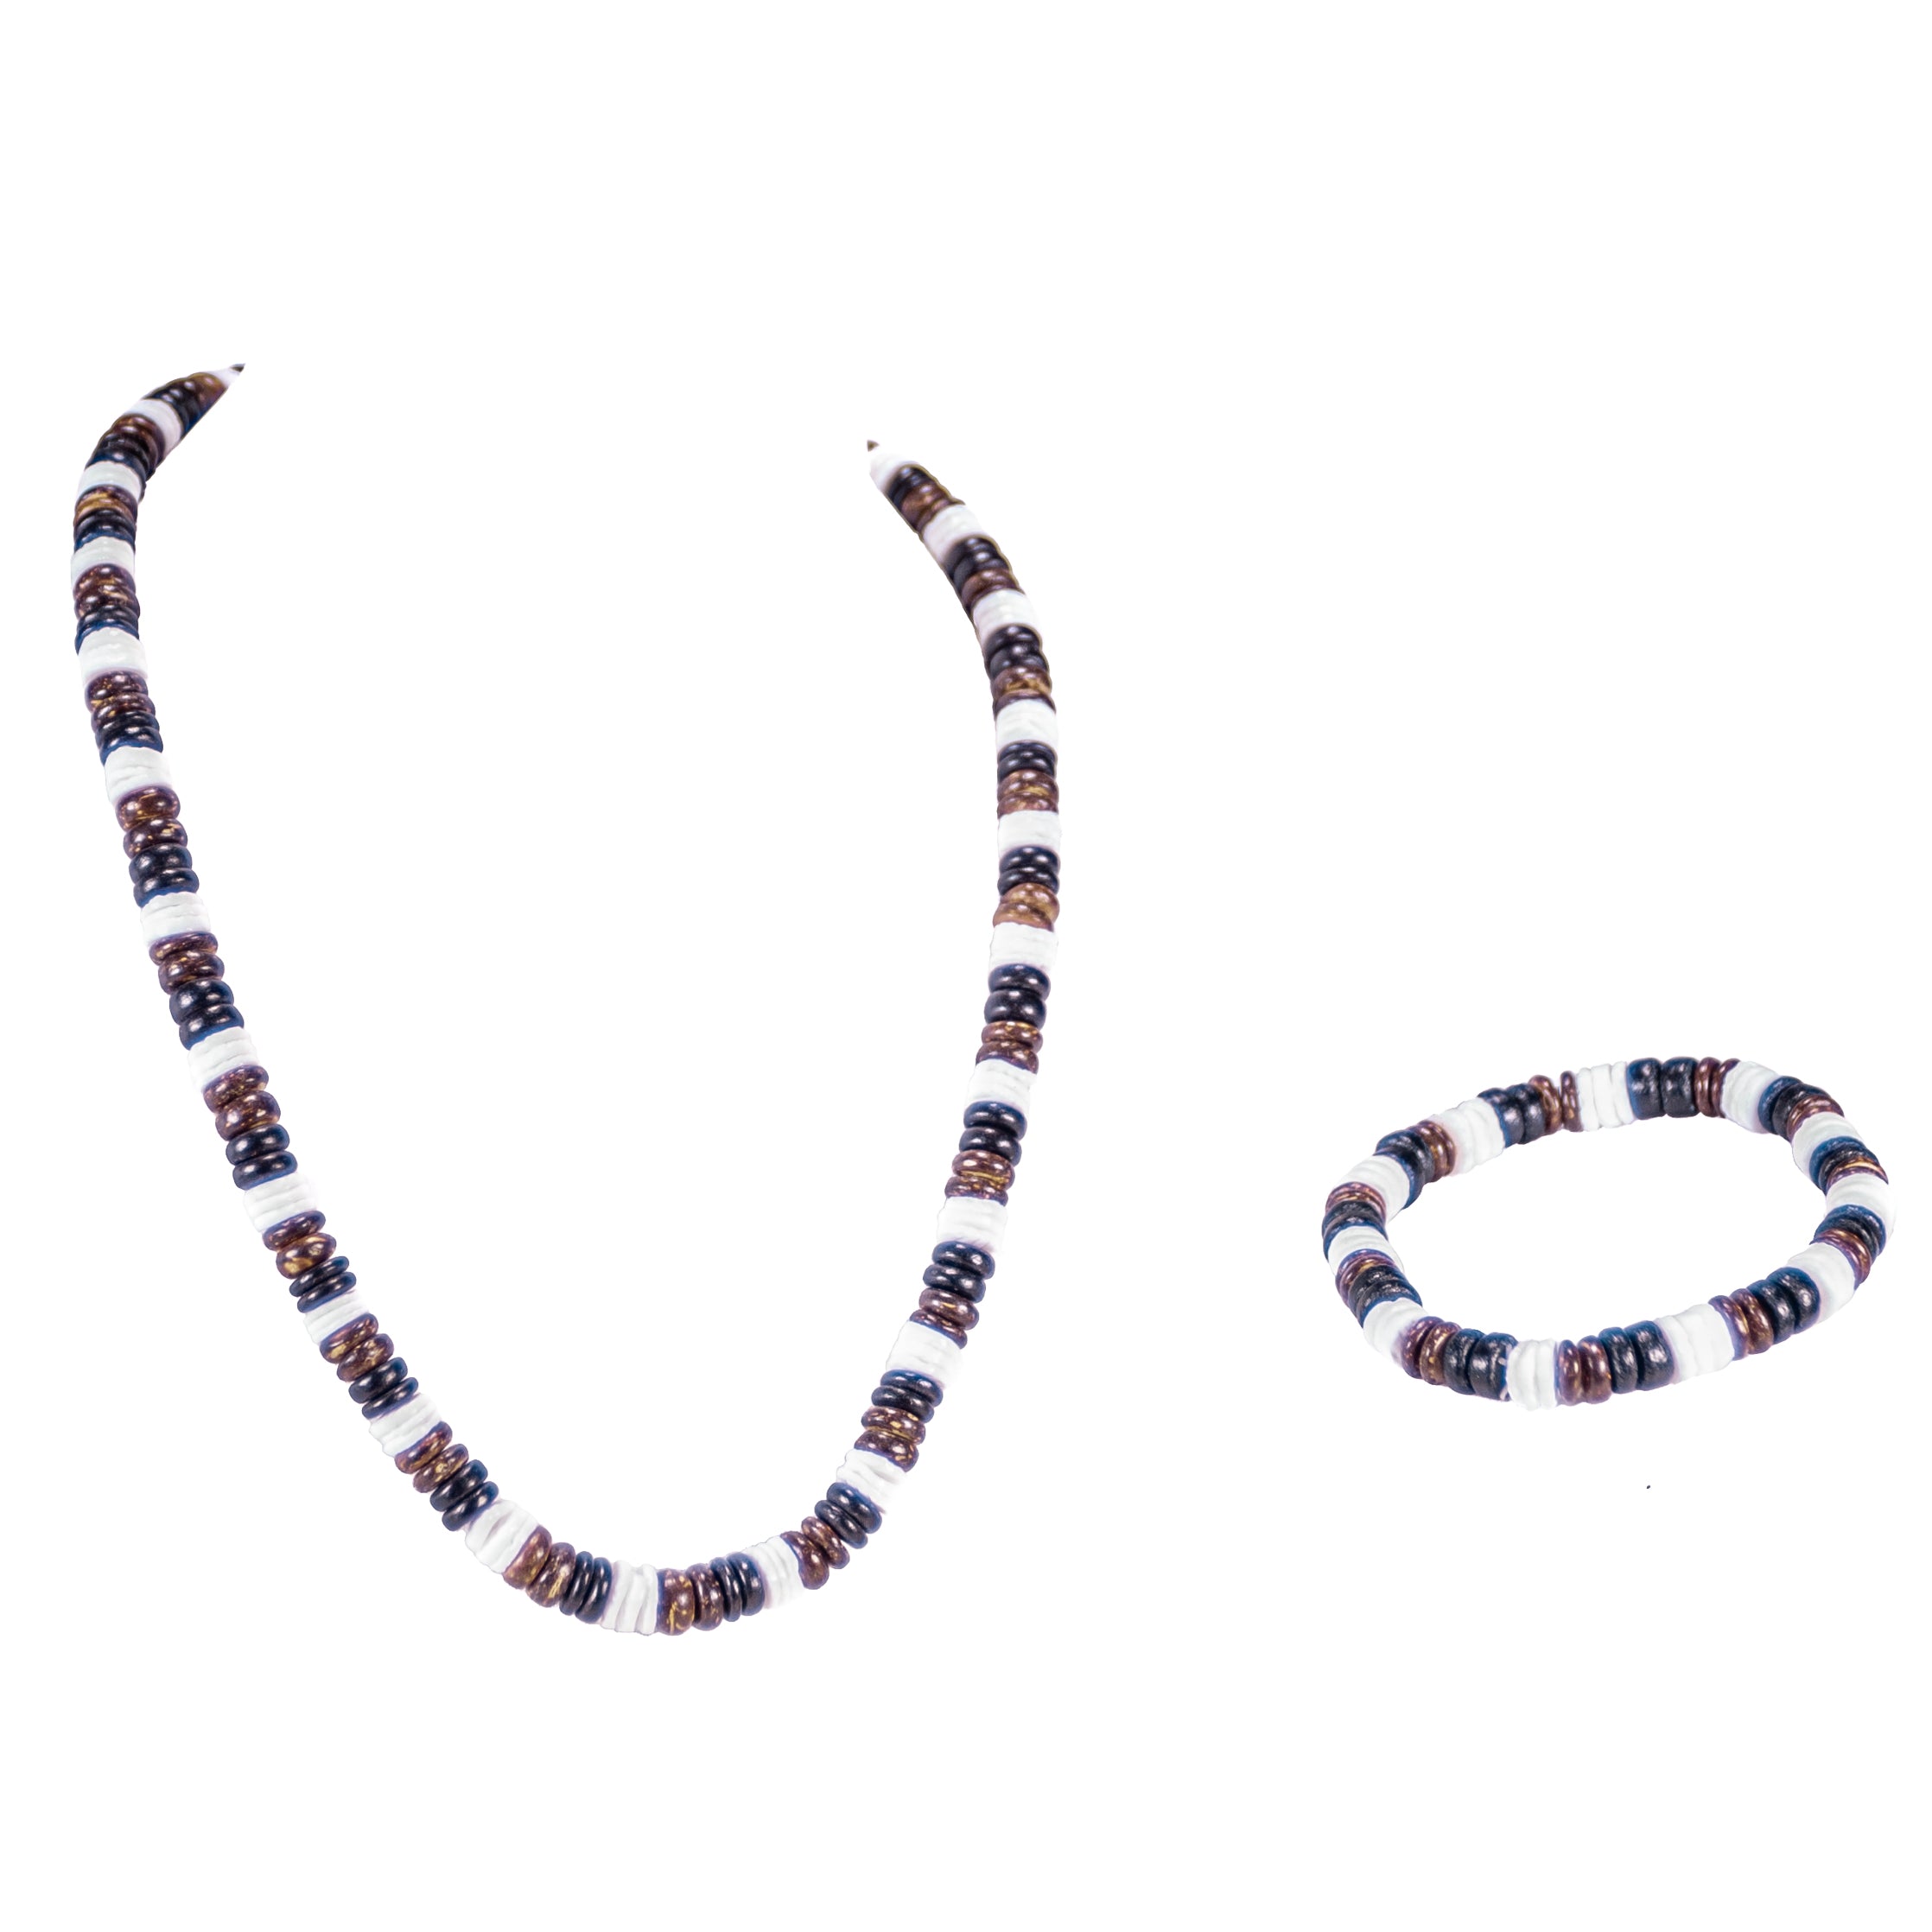 Black & Brown Coconut Beads and Puka Shell Beads Necklace & Bracelet Set